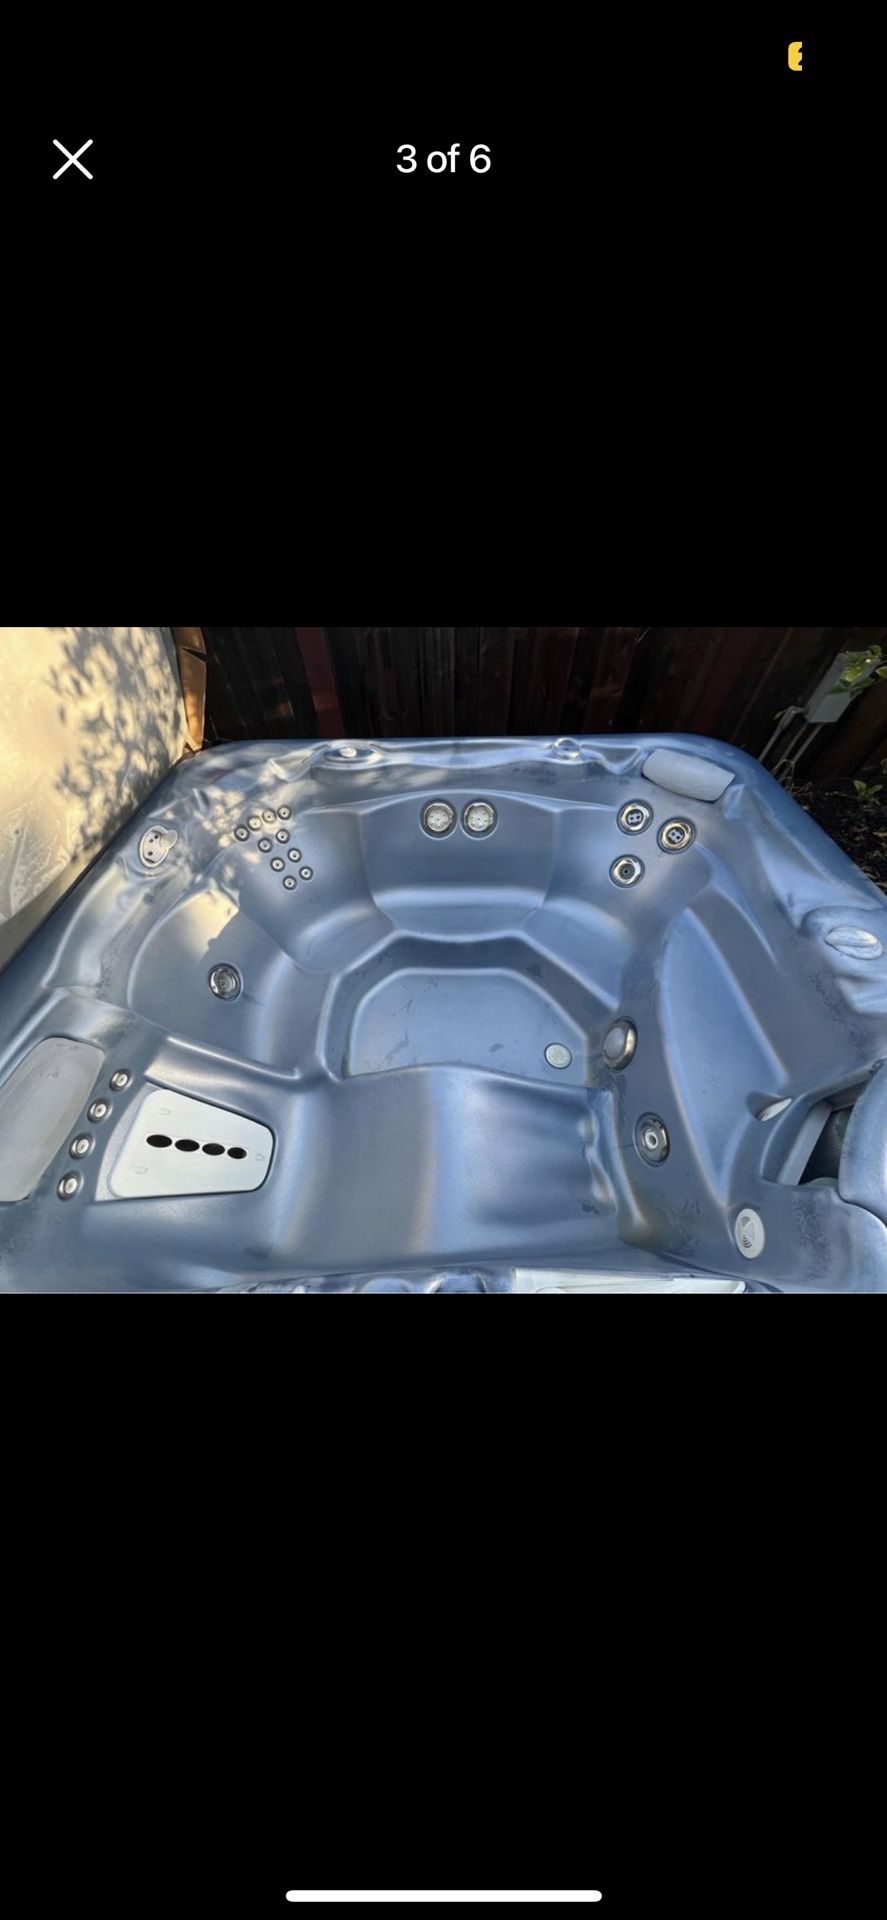 5 Seat Hot Springs  Hot Tub!! Good Condition!!!!